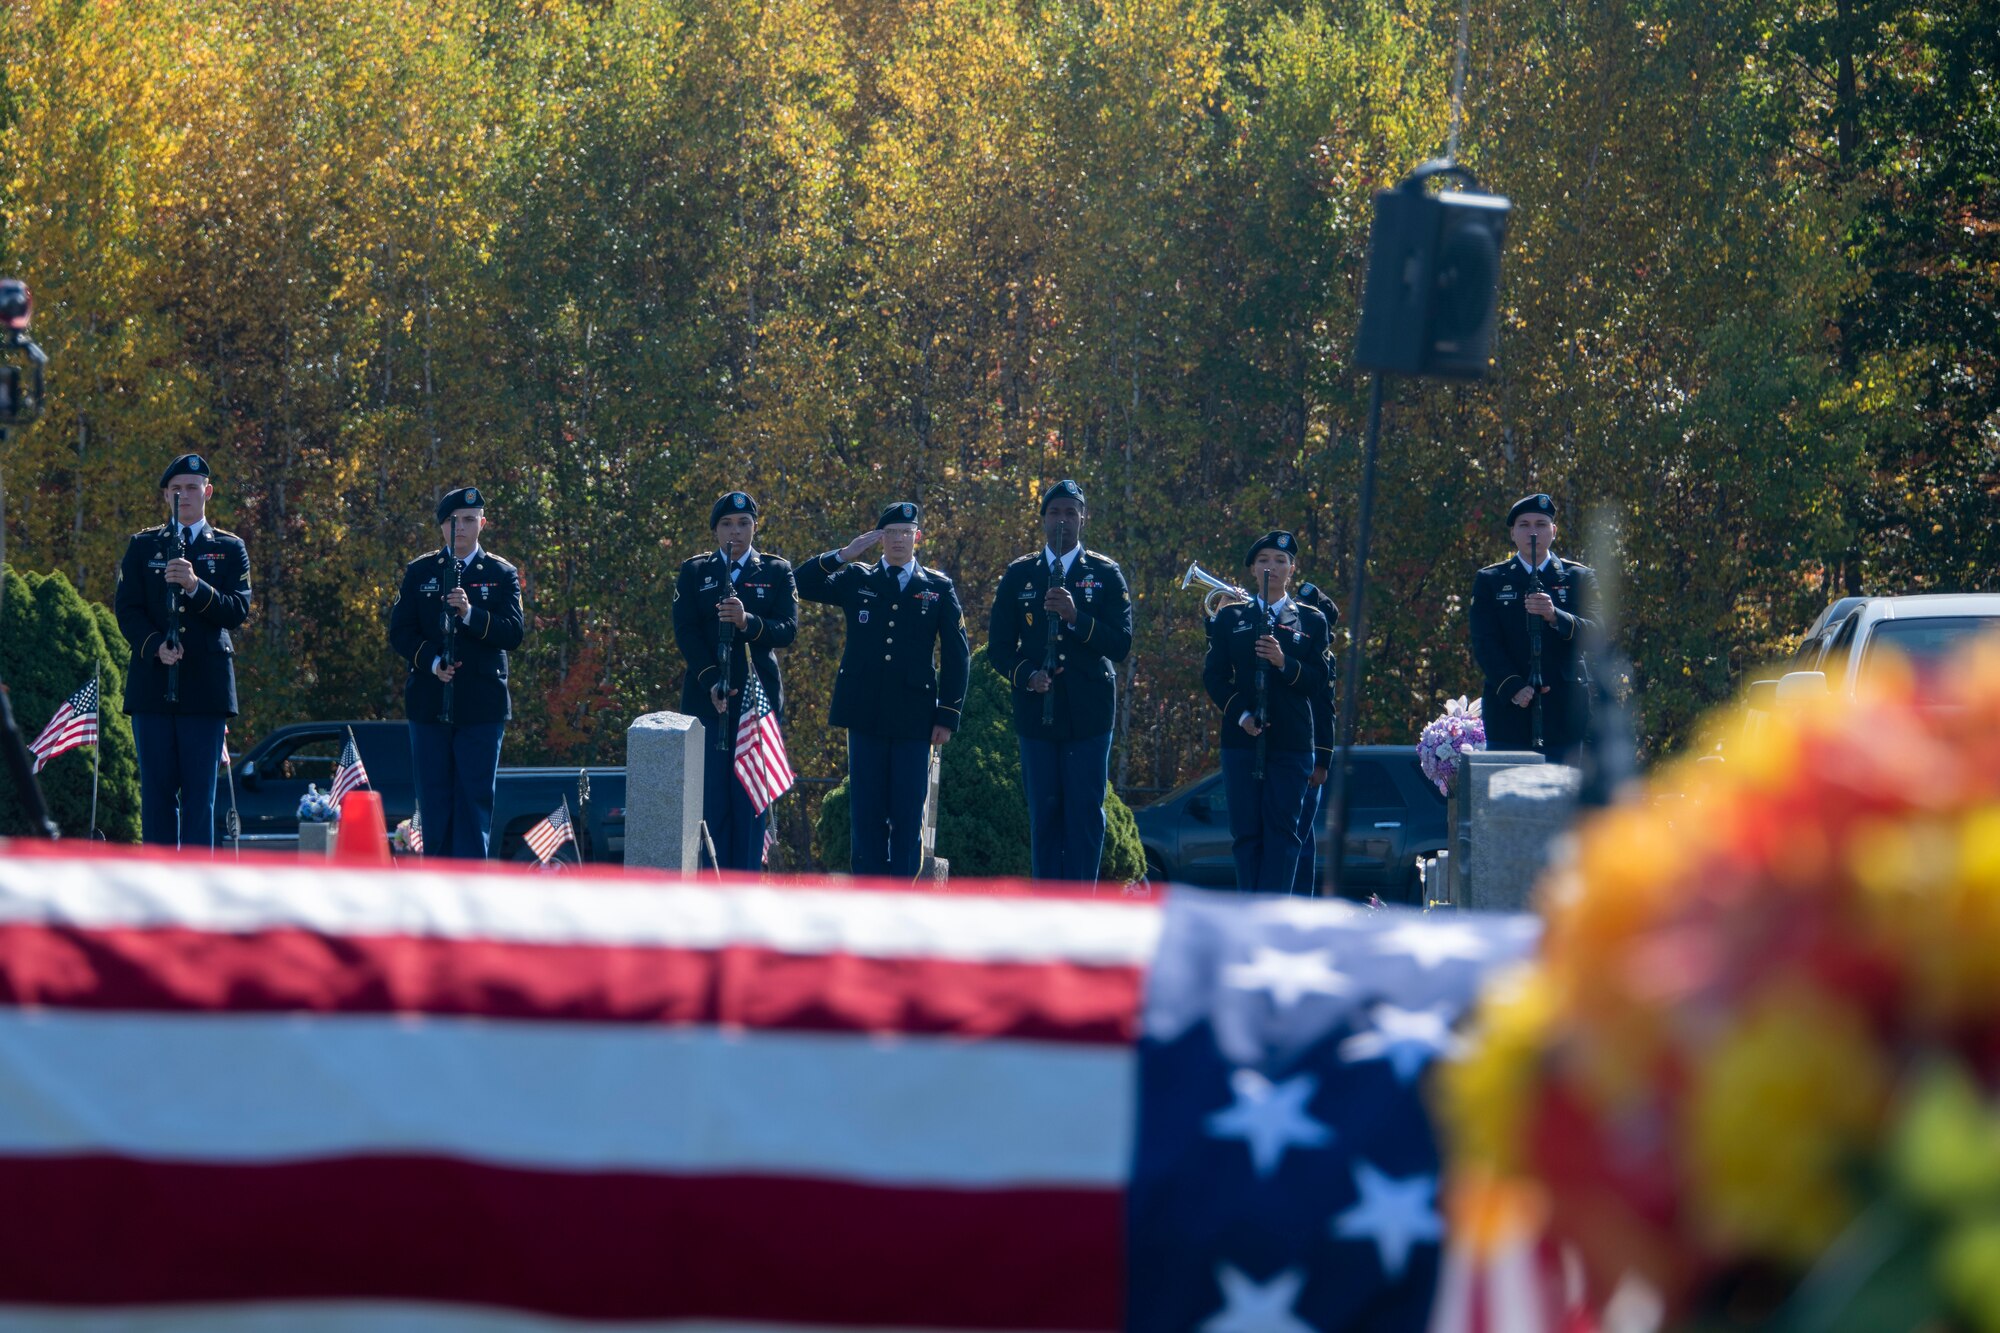 Members of the U.S. Army Honor Guard team from Fort Drum, New York, fold the American Flag for the funeral of U.S. Army Air Forces 2nd Lt. Earnest Vienneau, 97th Bombardment Group, at Millinocket, Maine, Oct. 9, 2021. The ceremonial procedure to properly fold an American flag is to fold it 13 times in a specific manner,with each fold having its own specific meaning. (U.S. Air Force photo by Staff Sgt. Cody Dowell)